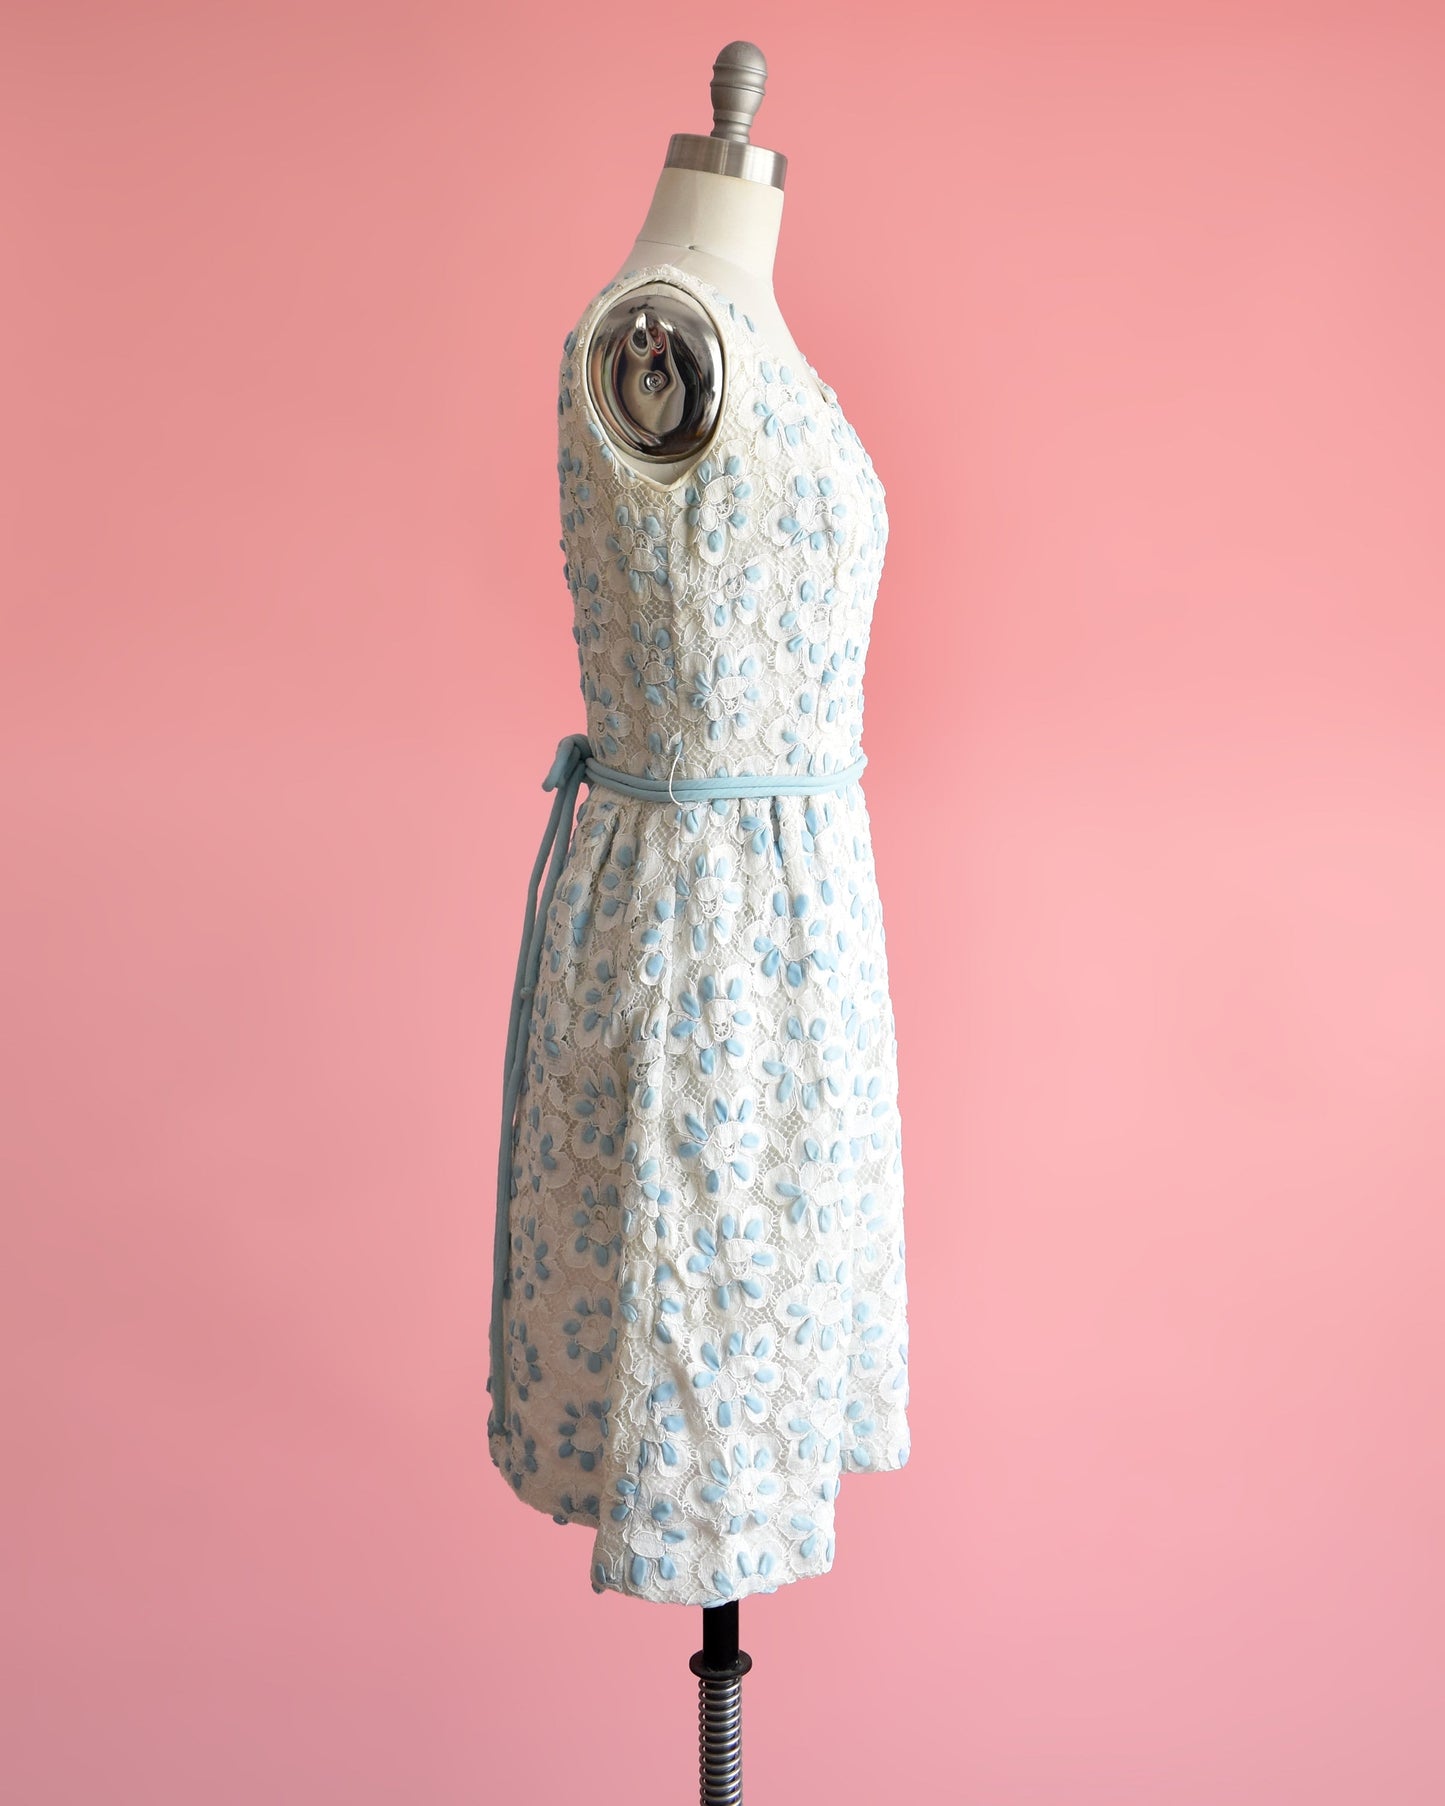 Side view of a vintage 60s white and blue floral lace dress that is sleeveless with a scoop neckline. Fitted waist with a matching double blue rope tie belt. Flared out skirt. Dress is modeled on a dress form